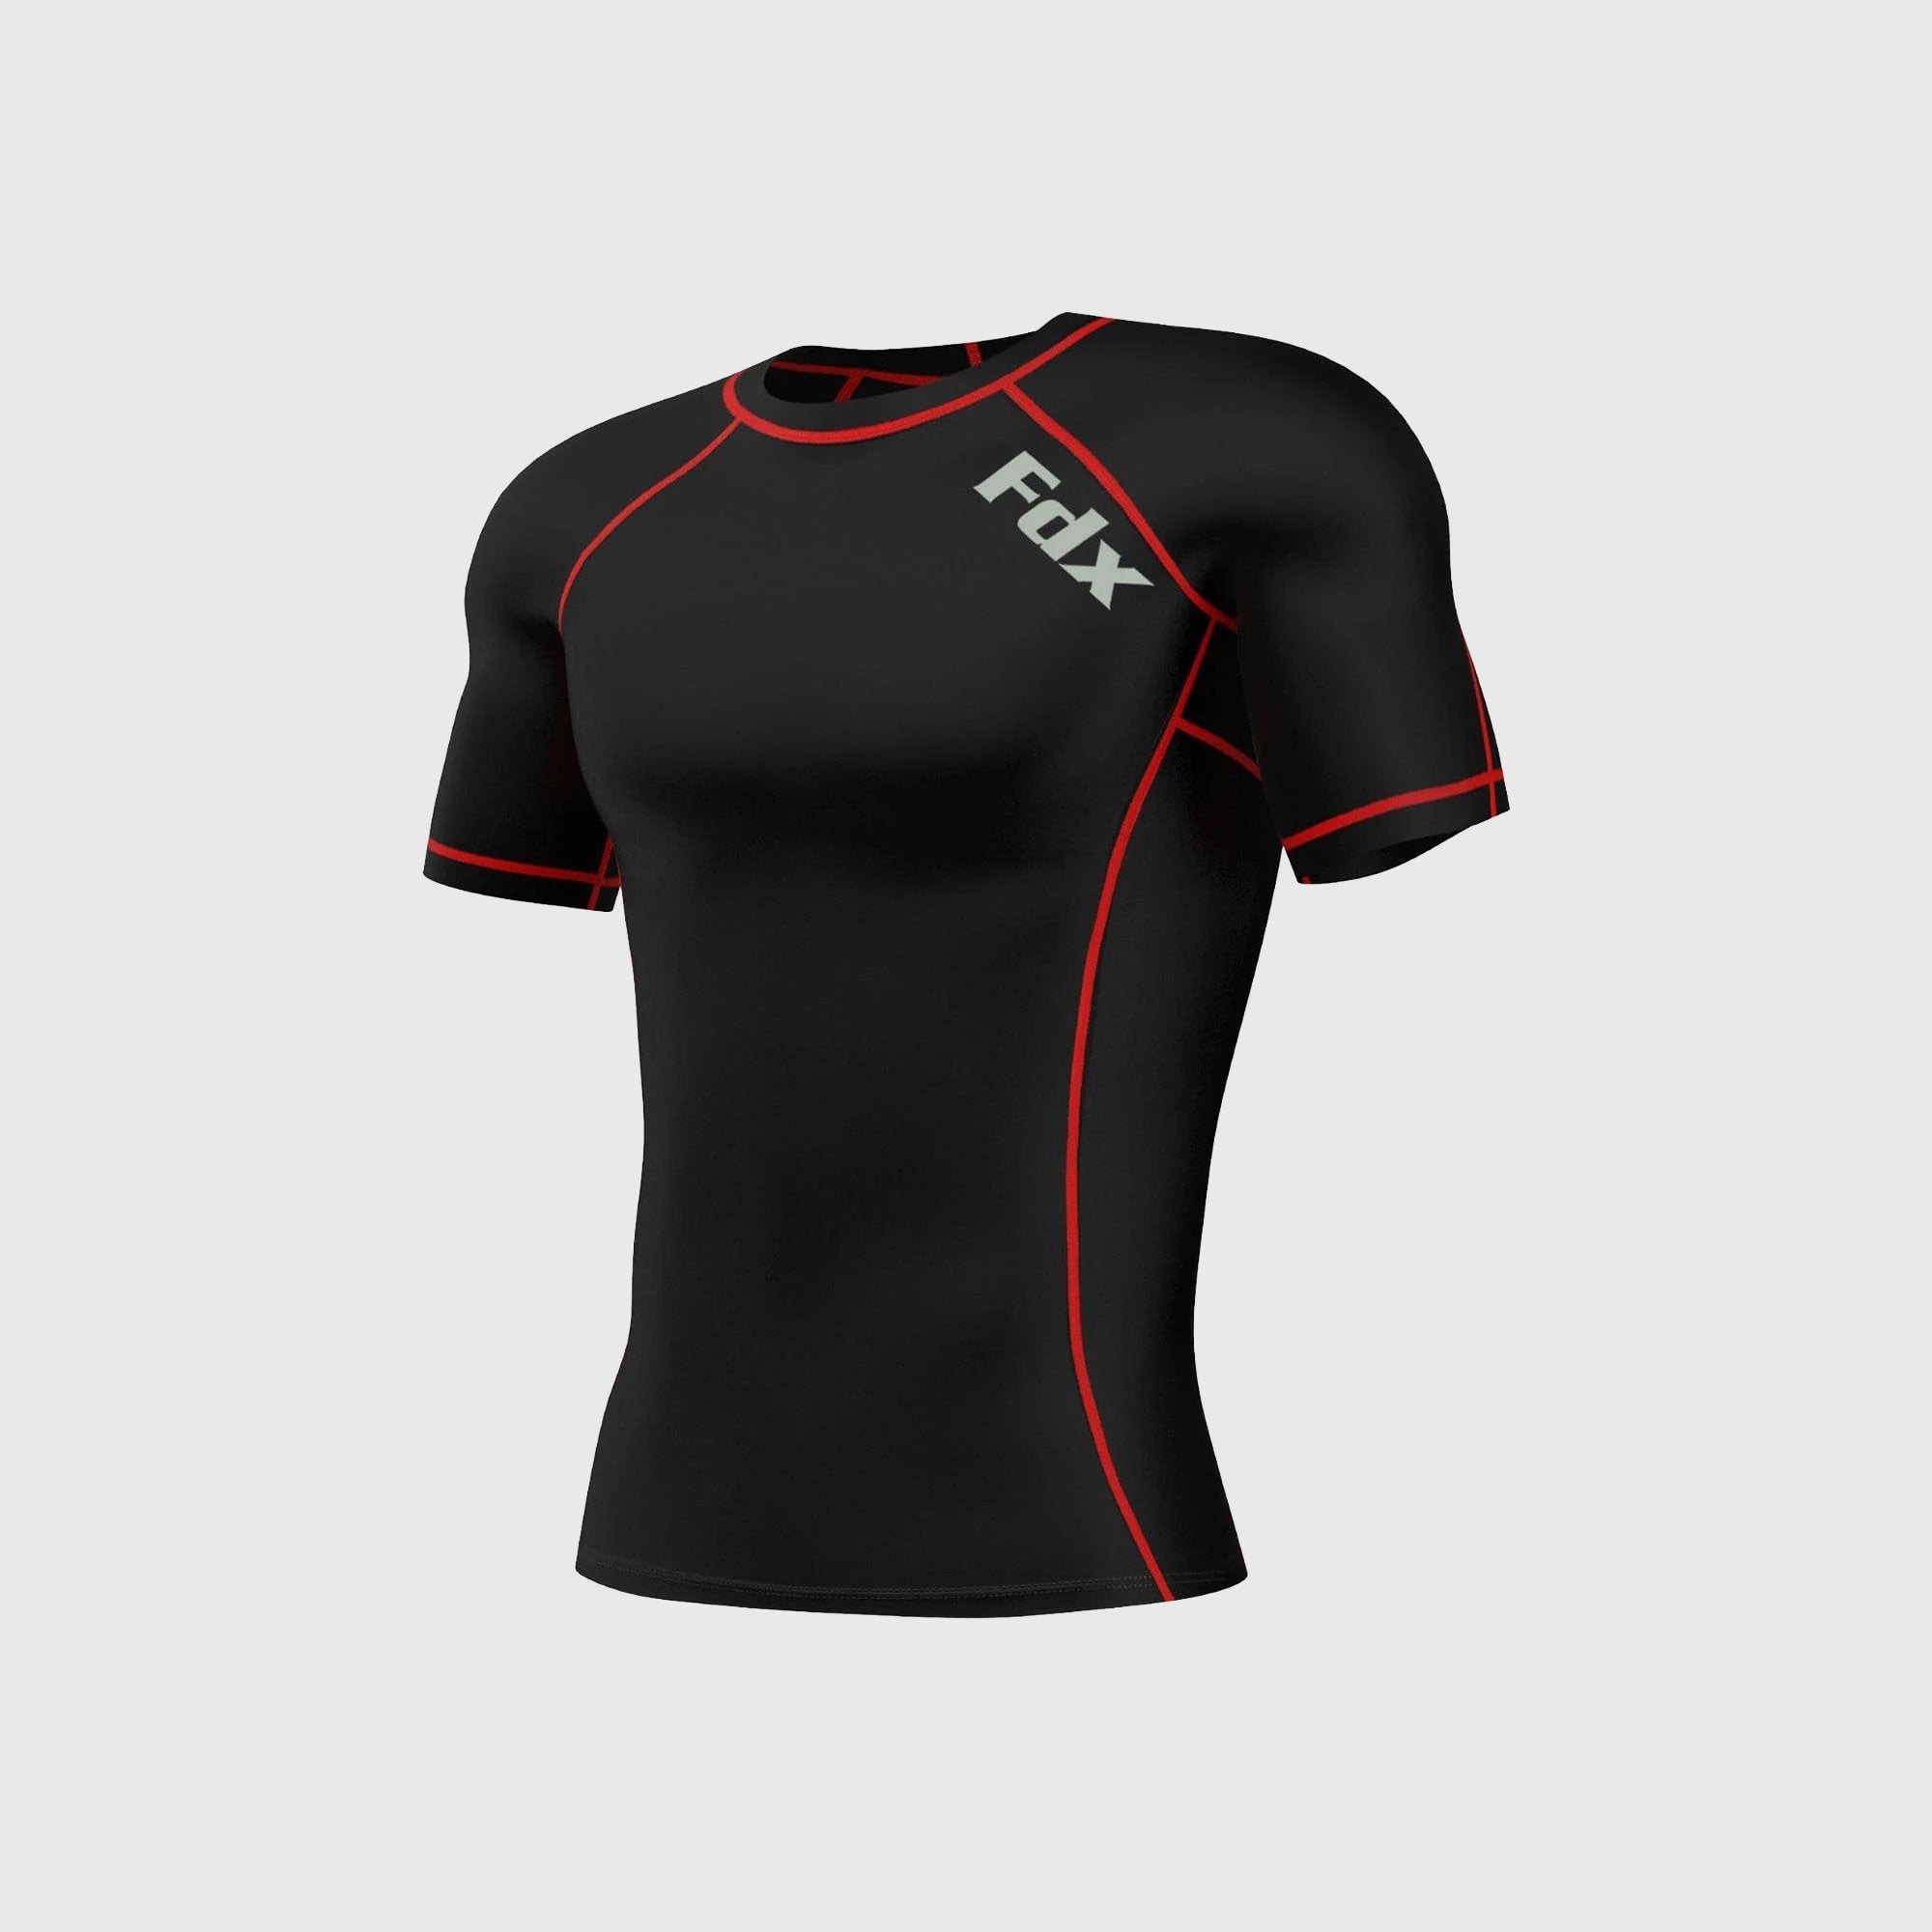 Fdx Men's Black & Red Short Sleeve Compression Top Running Gym Workout Wear Rash Guard Stretchable Breathable Base layer Shirt - Cosmic